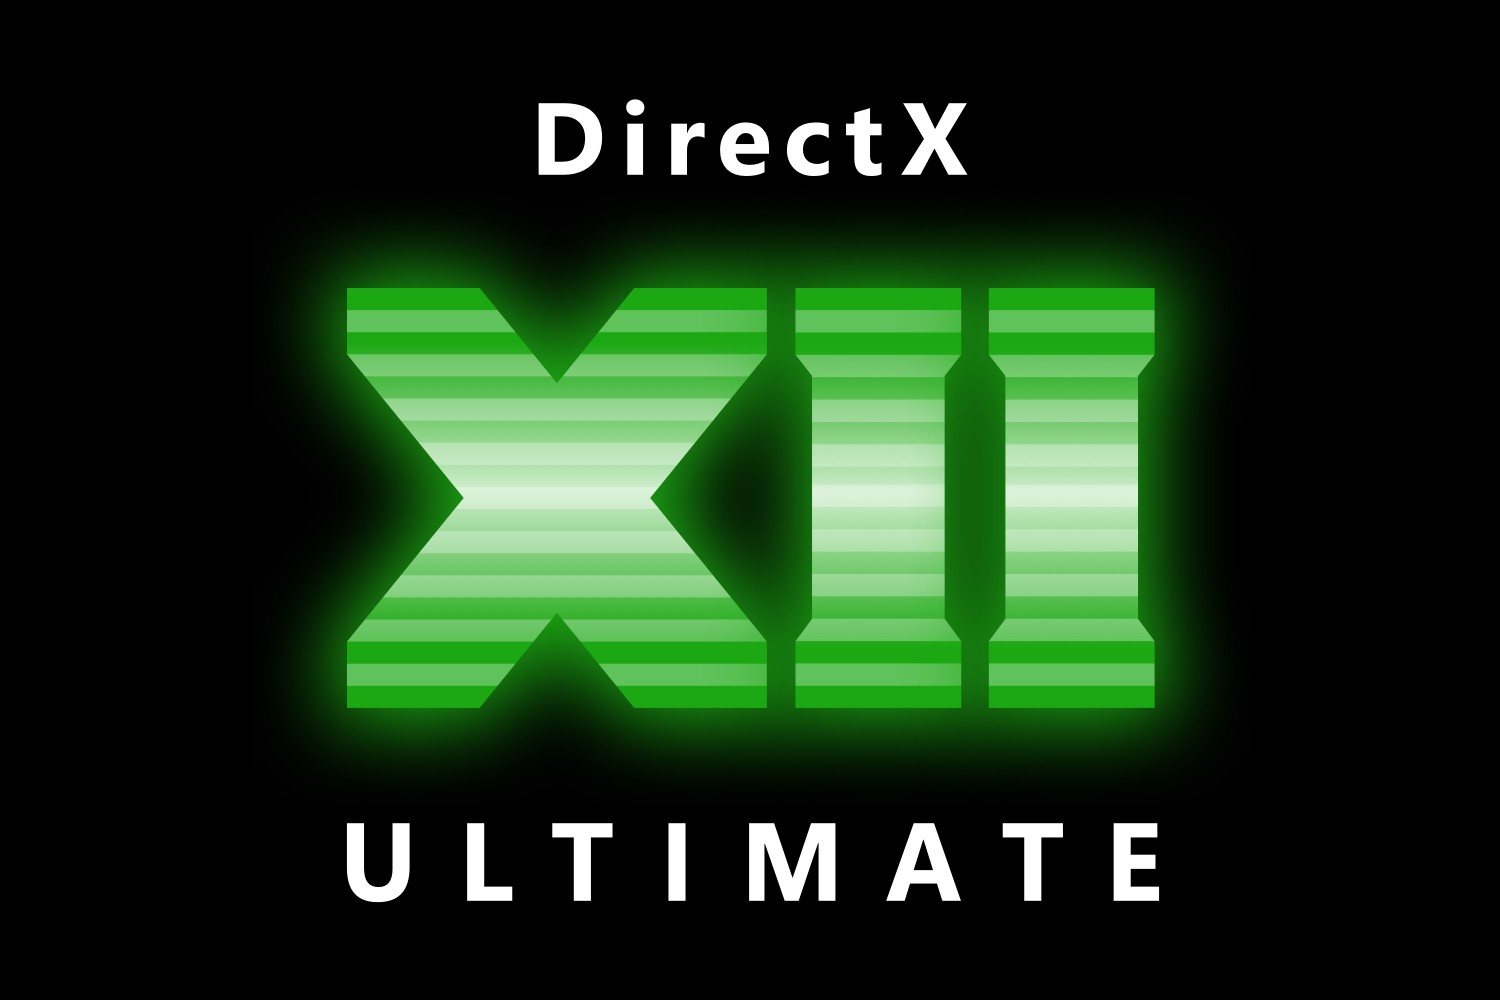 What is DirectX, and why is it important for PC games?